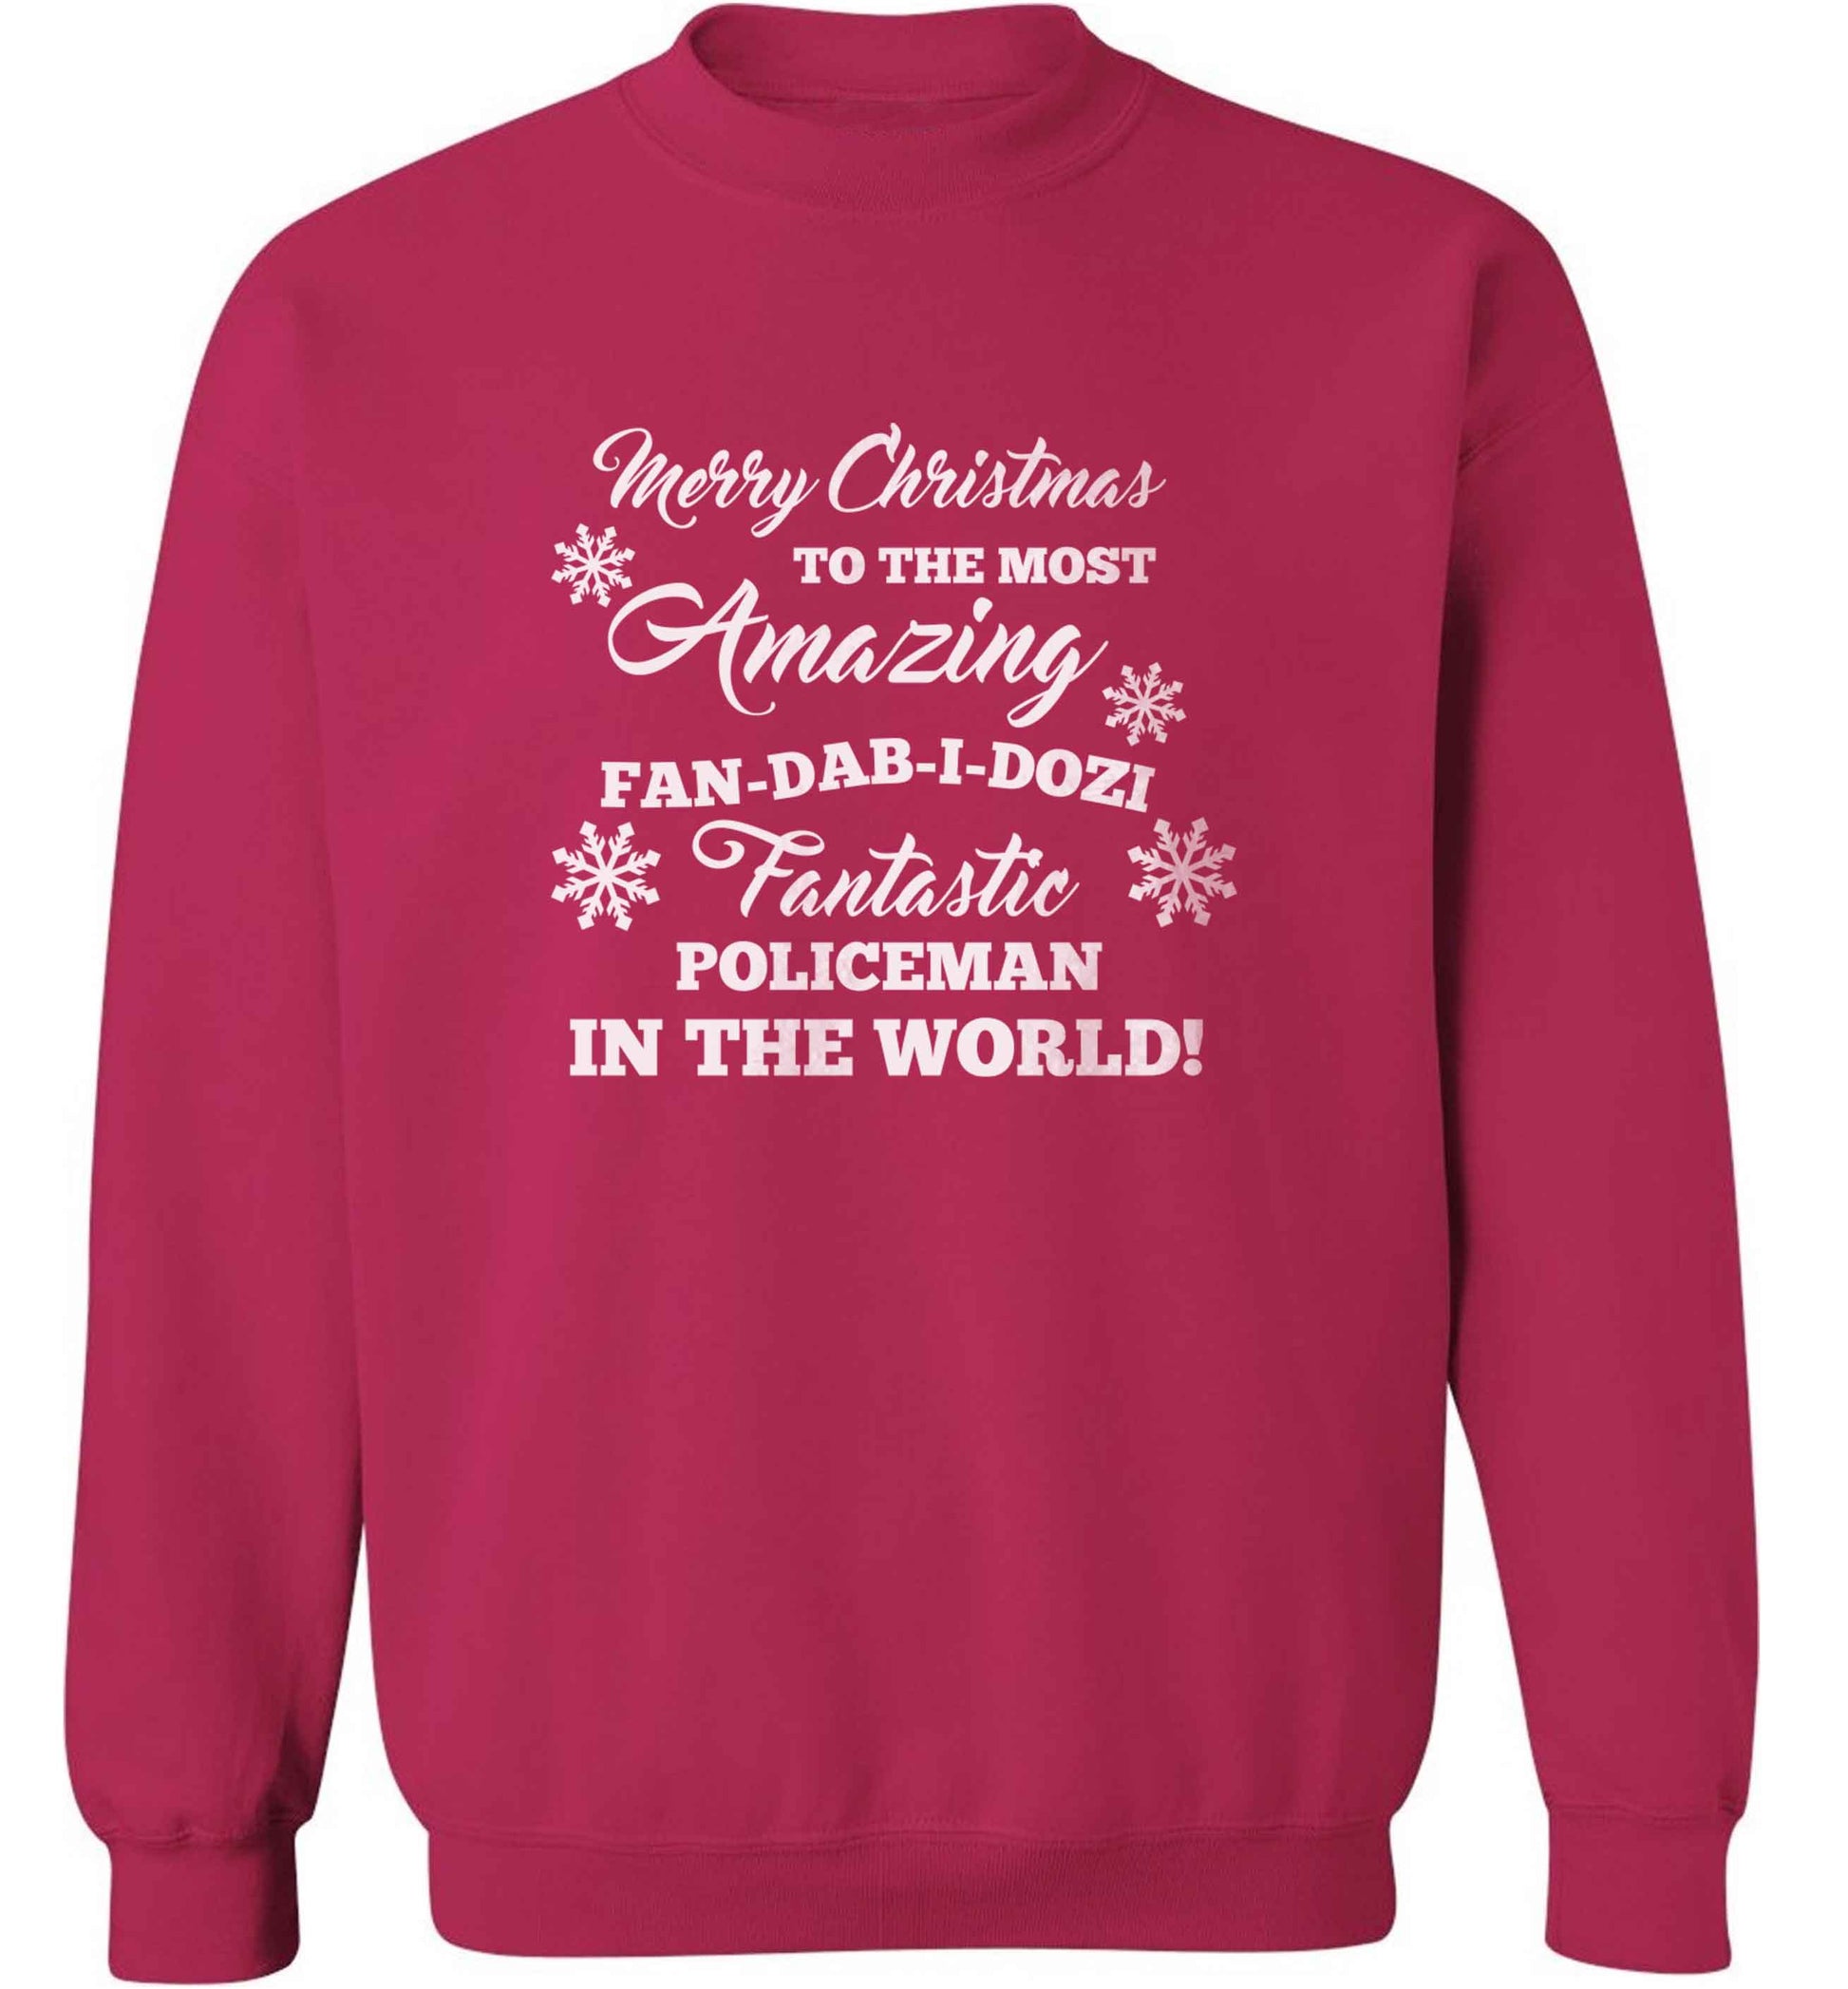 Merry Christmas to the most amazing policeman in the world! adult's unisex pink sweater 2XL